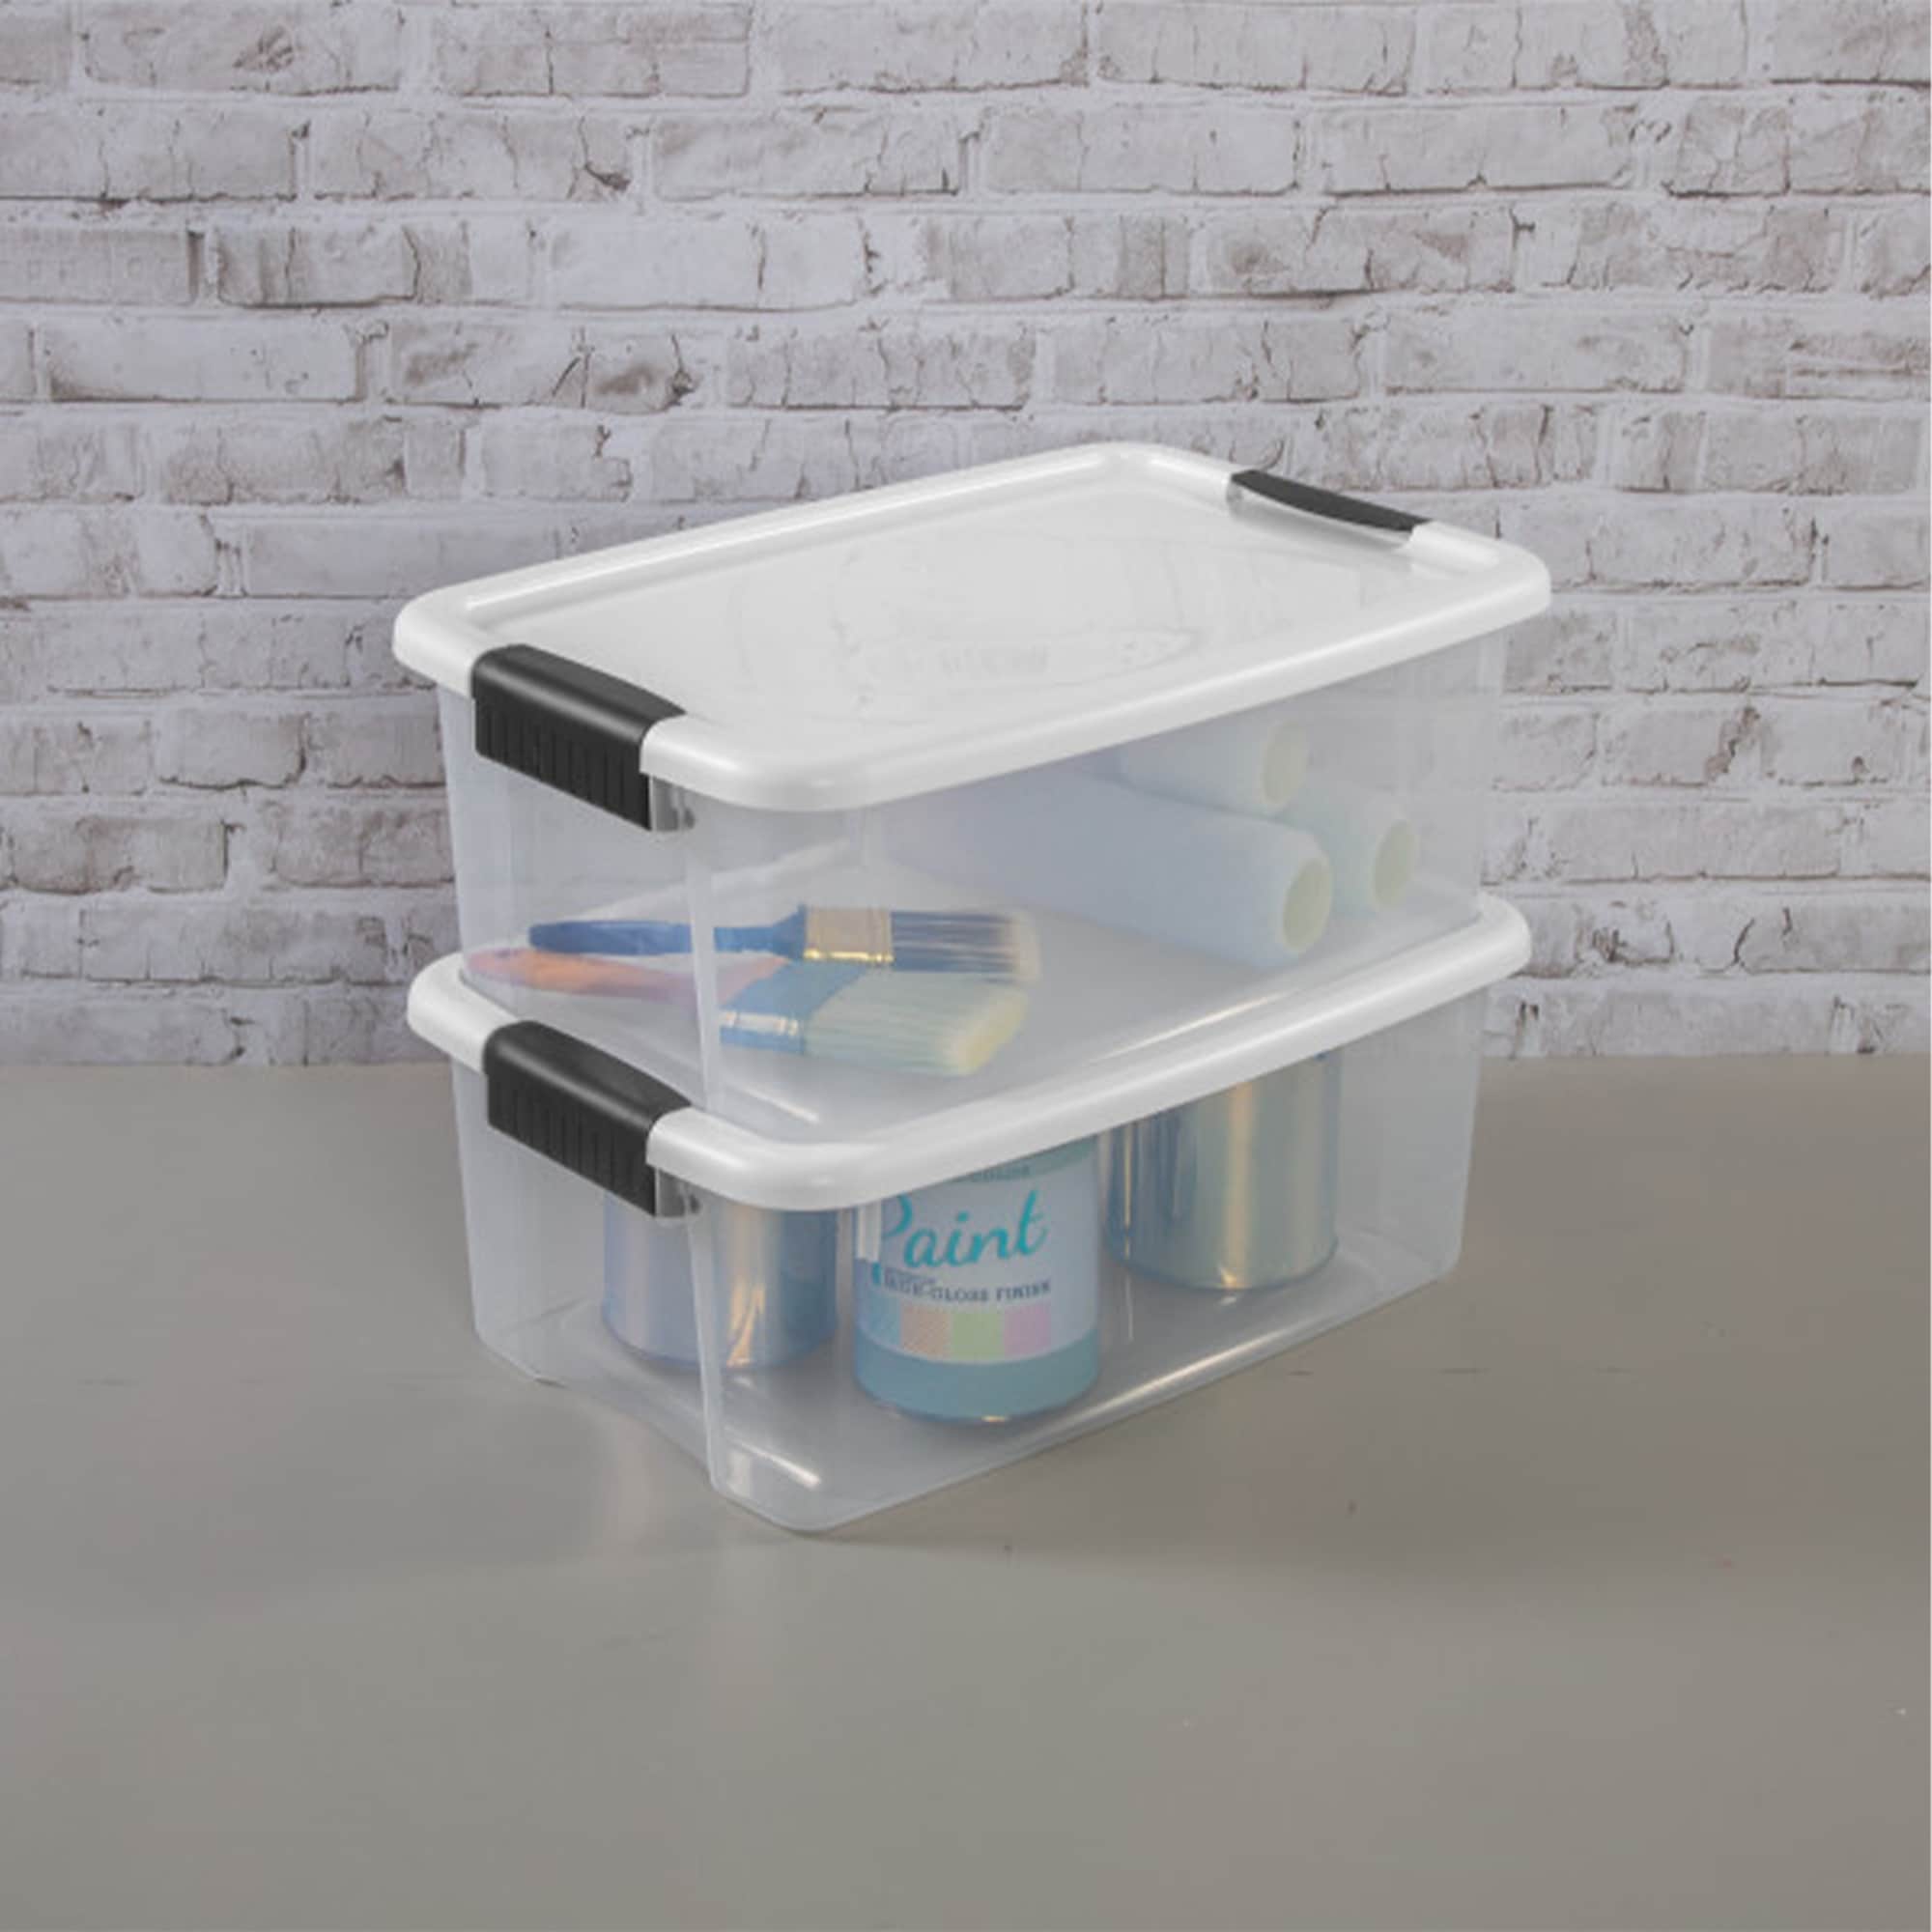 https://ak1.ostkcdn.com/images/products/is/images/direct/1d9855c0a60accd44d68387cf9f3d2910e4a9fca/Sterilite-18-Qt-Clear-Plastic-Stackable-Storage-Bin-w--White-Latch-Lid%2C-18-Pack.jpg